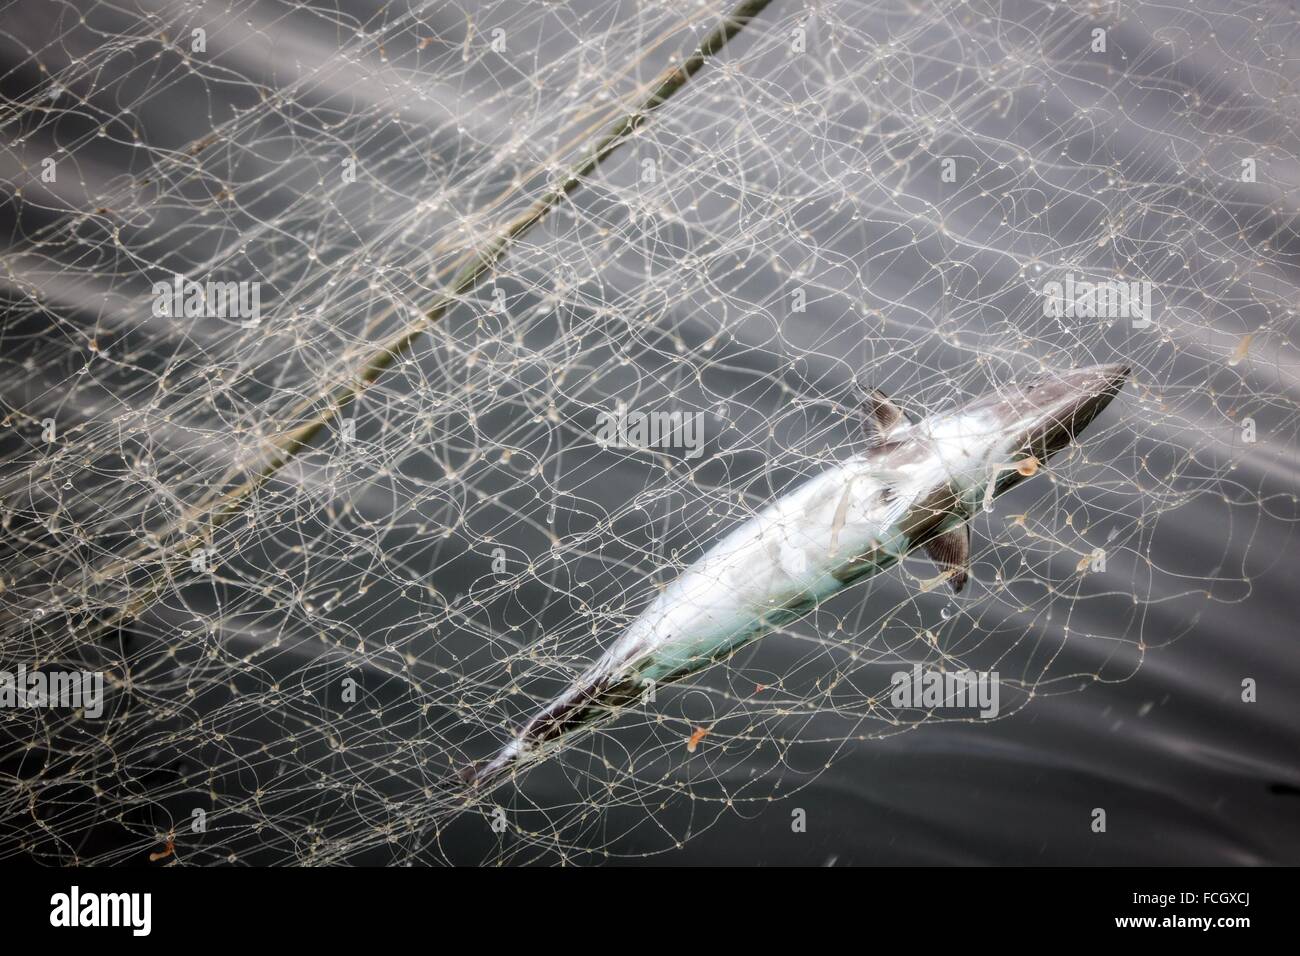 BONITO, A TYPE OF SMALL TUNA, CAUGHT IN THE NETS, SEA FISHING ON THE GILLNETTING BOAT 'LES OCEANES' OFF THE COAST OF LORIENT (56 Stock Photo